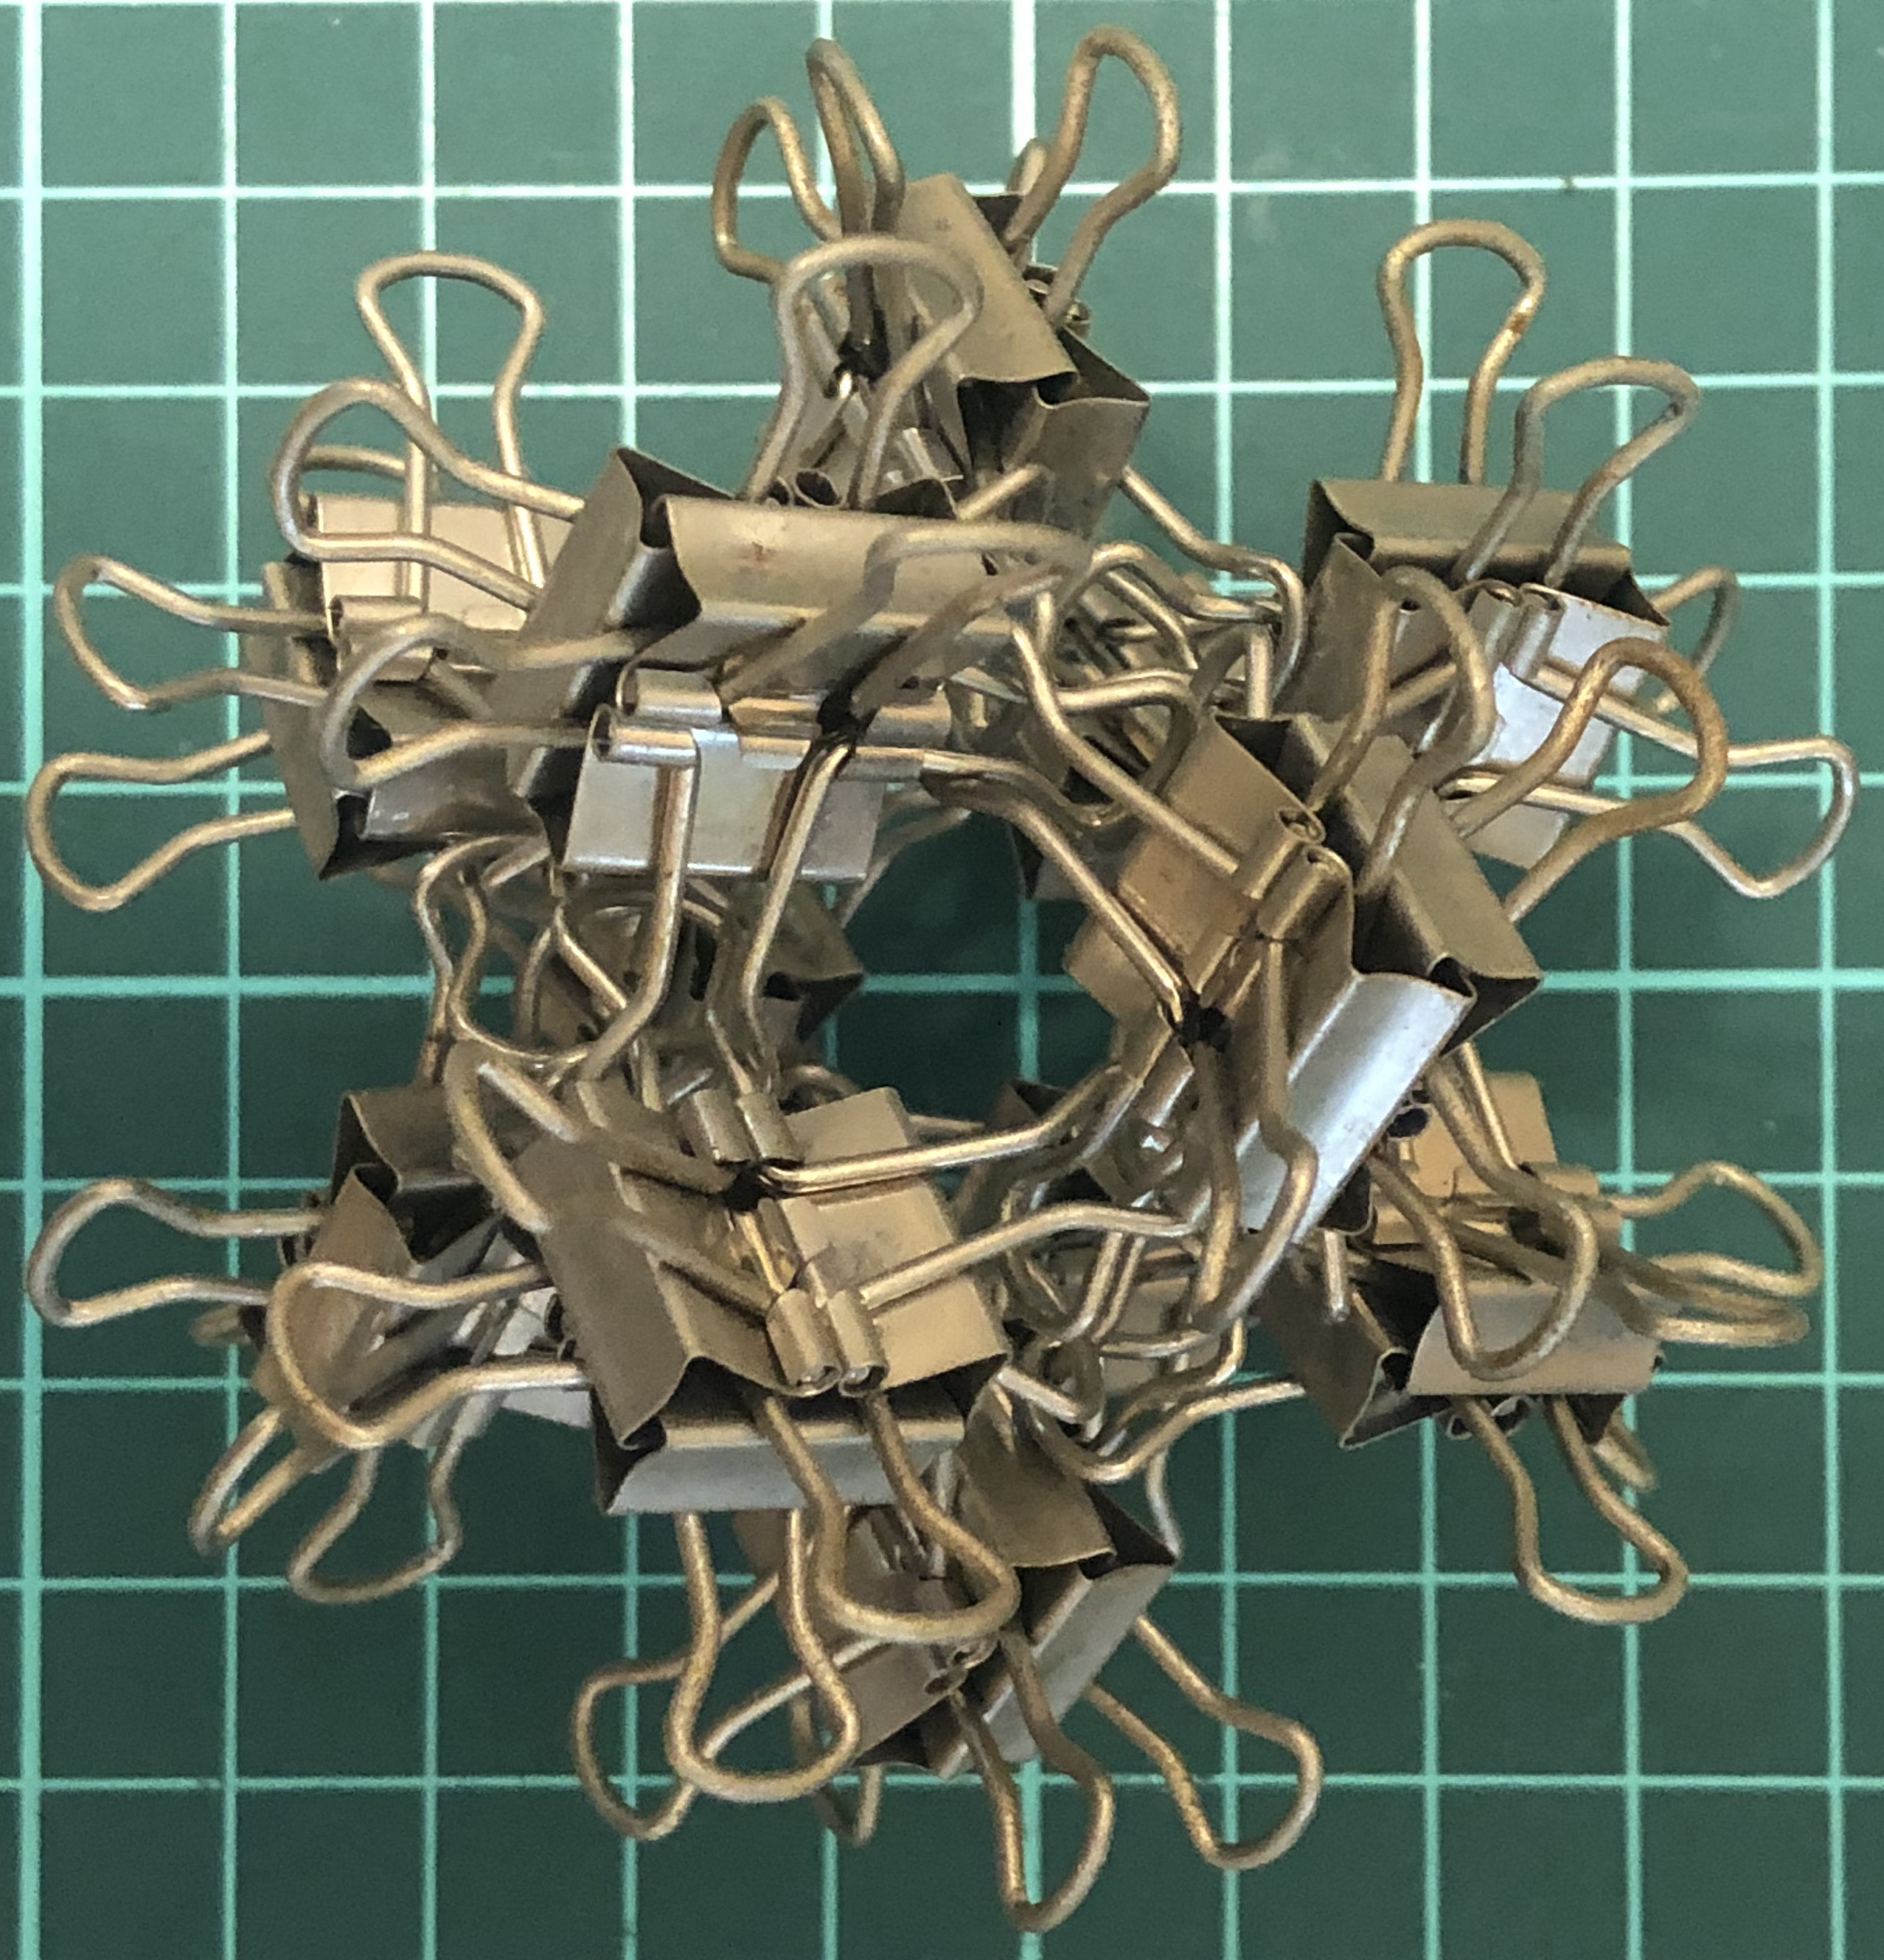 48 clips forming 12 H-edges forming octahedron